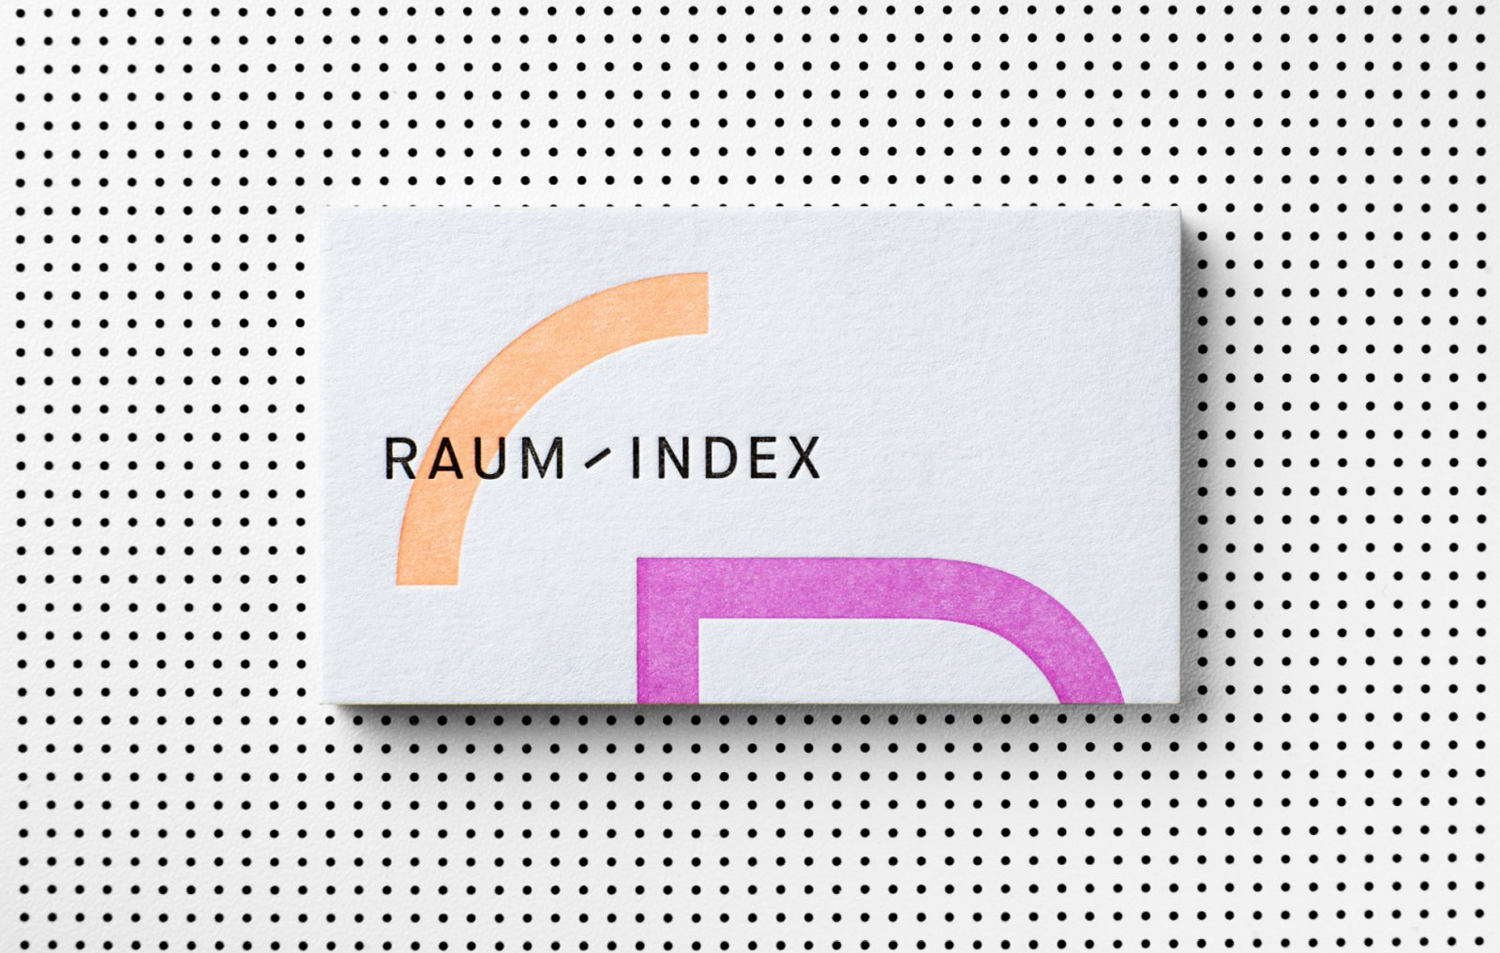 Brand identity and business cards by Graz and Wien-based Moodley for Austrian shop design studio Raumindex